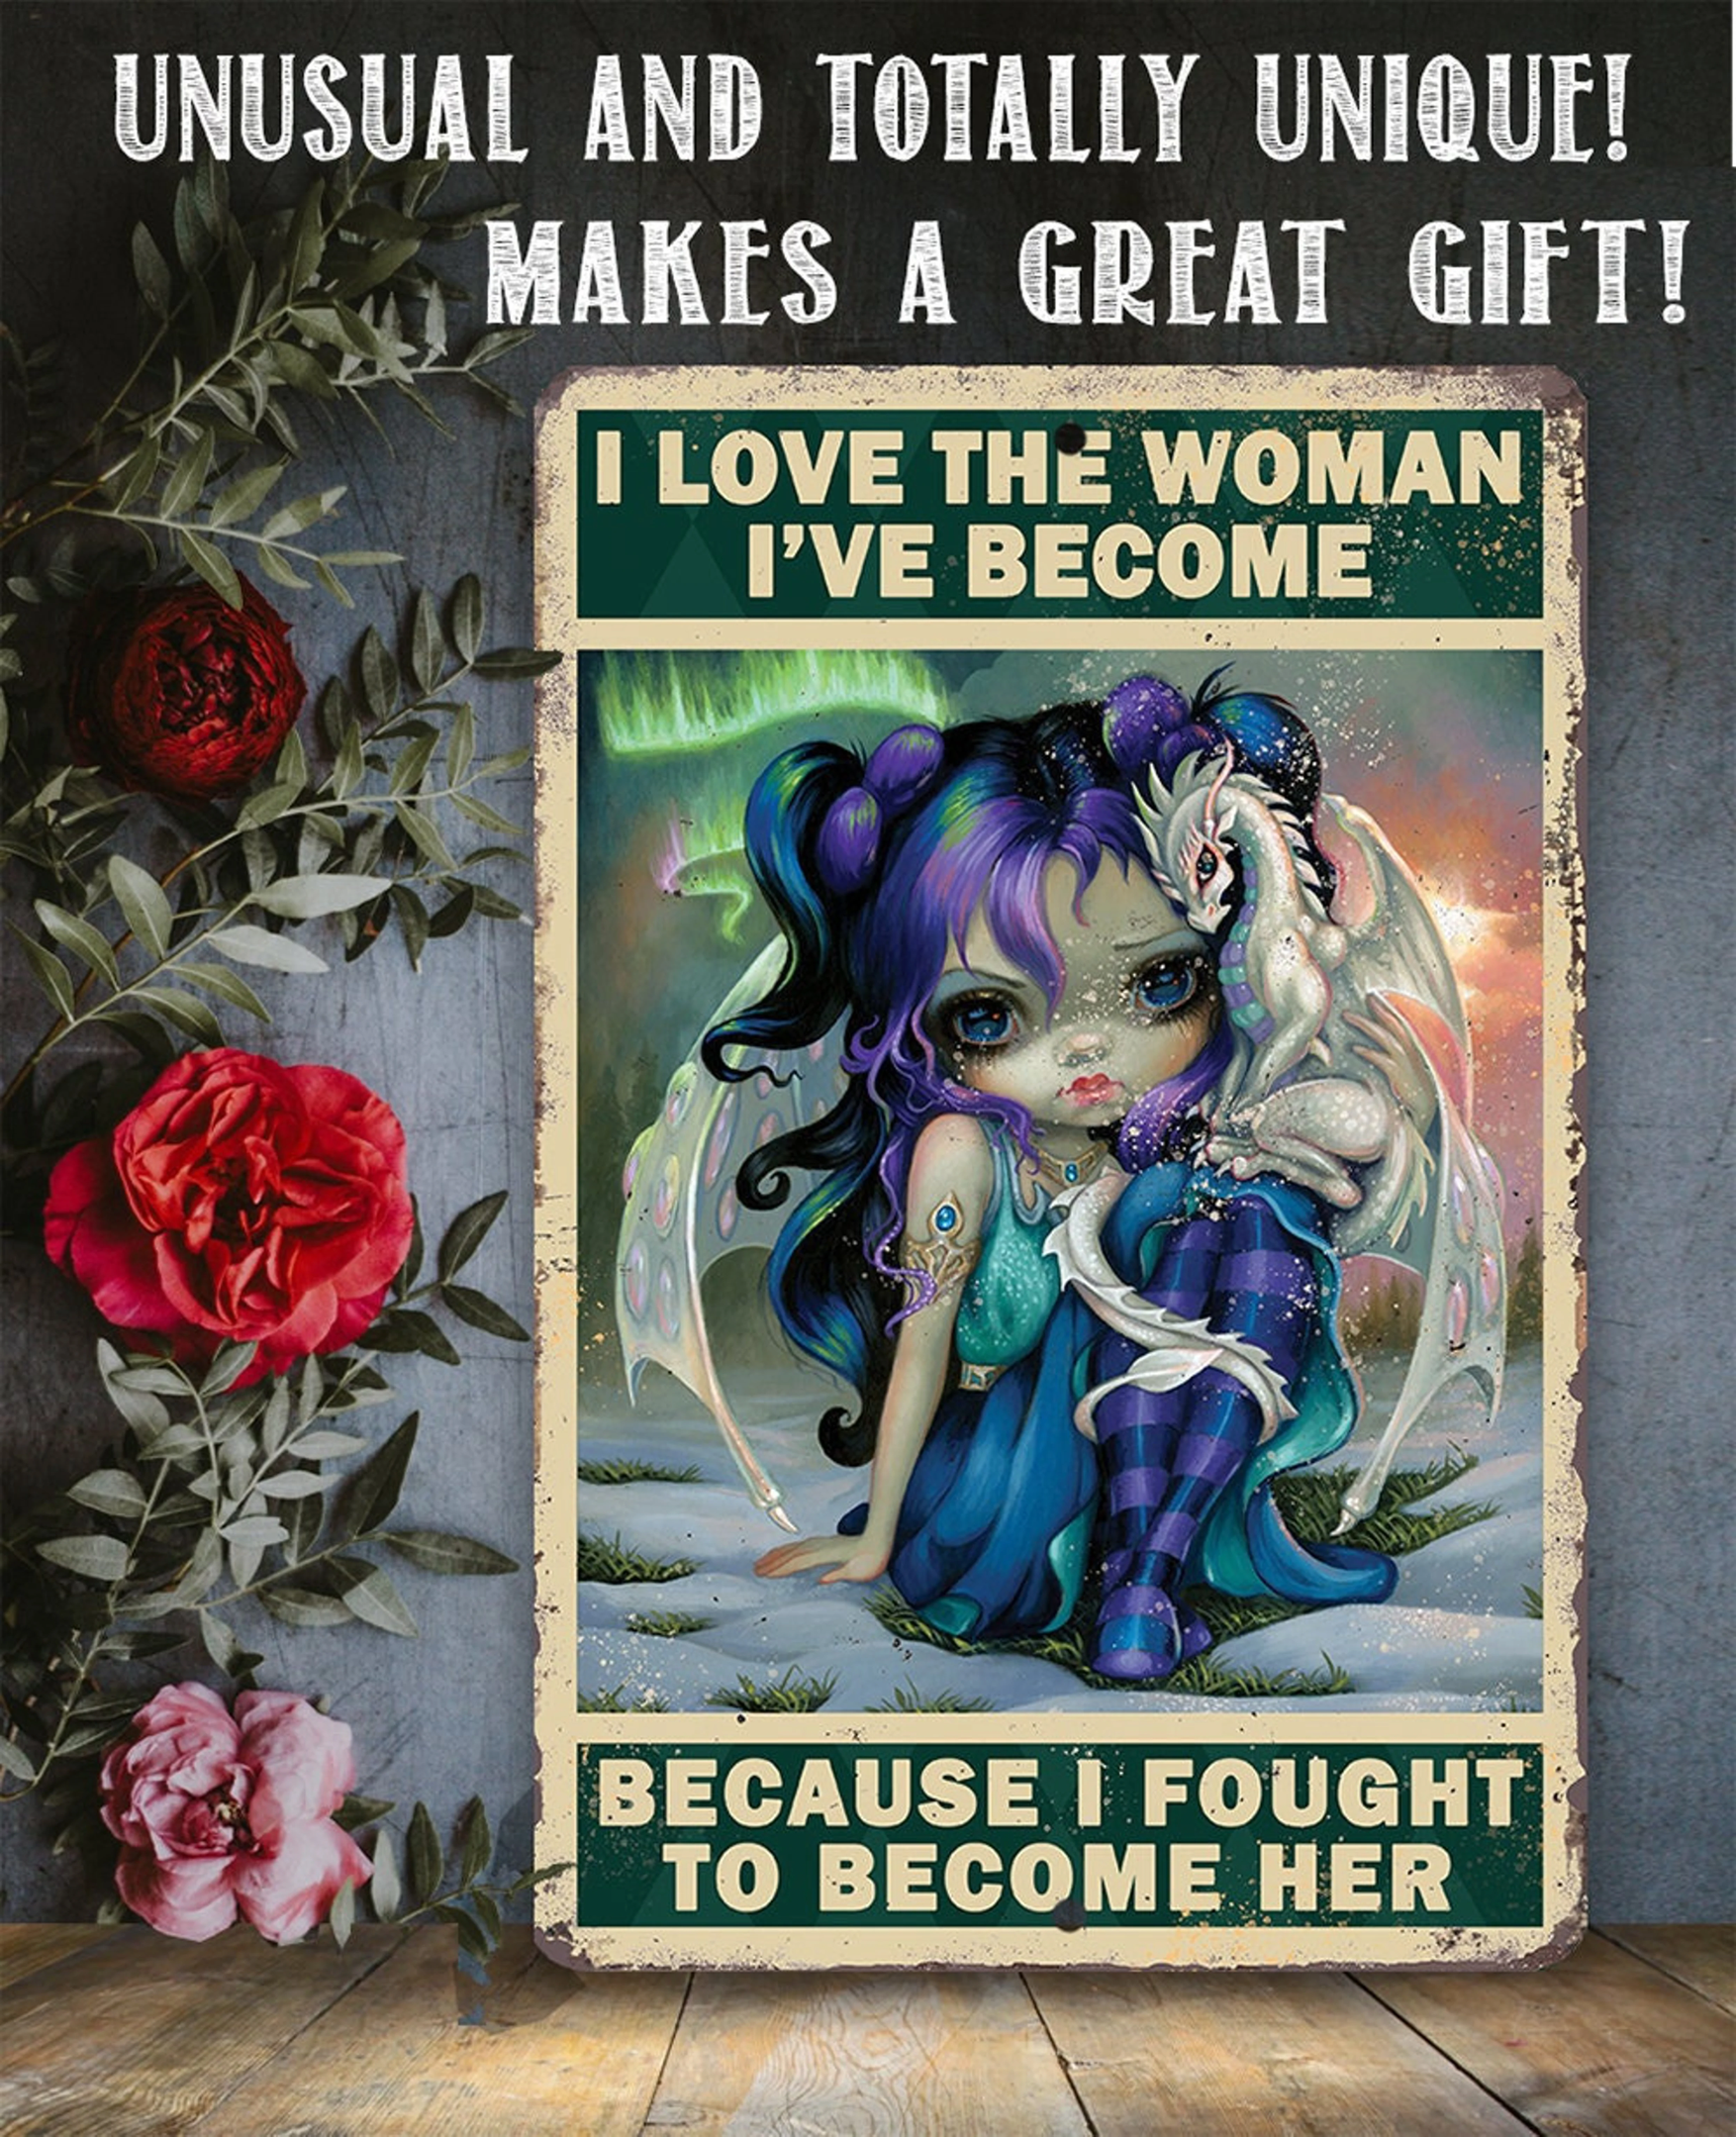 Strangeling I Love The Woman Ive Become Aluminum Tin Awesome Gothic Metal Poster